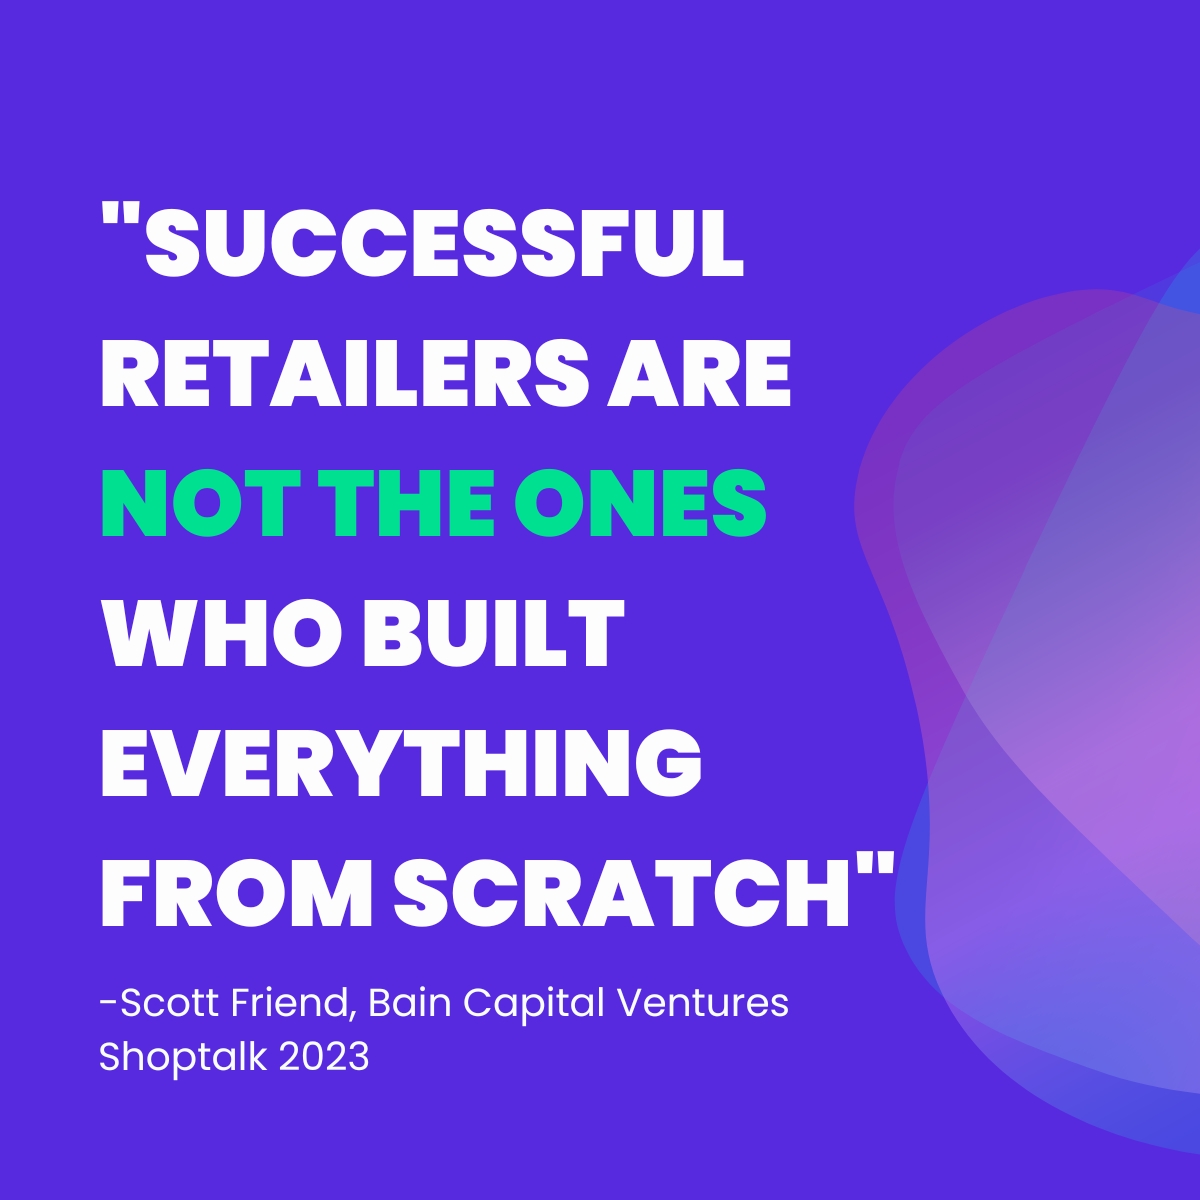 Quote from Bain Capital Ventures on successful retailers at Shoptalk 2023